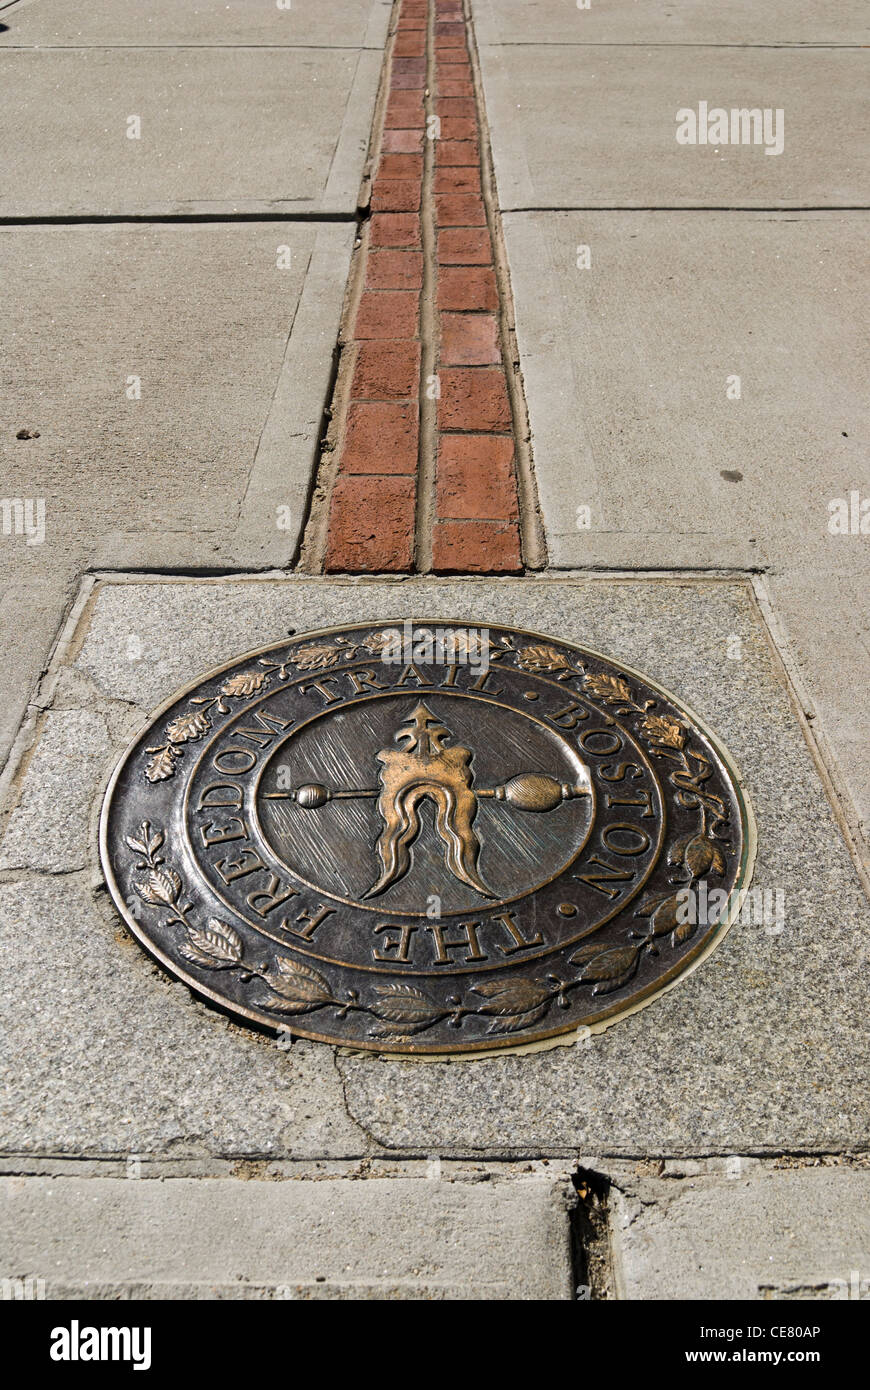 Plaque indicating the start of the Freedom Trail through downtown Boston, Massachusetts, USA. Stock Photo